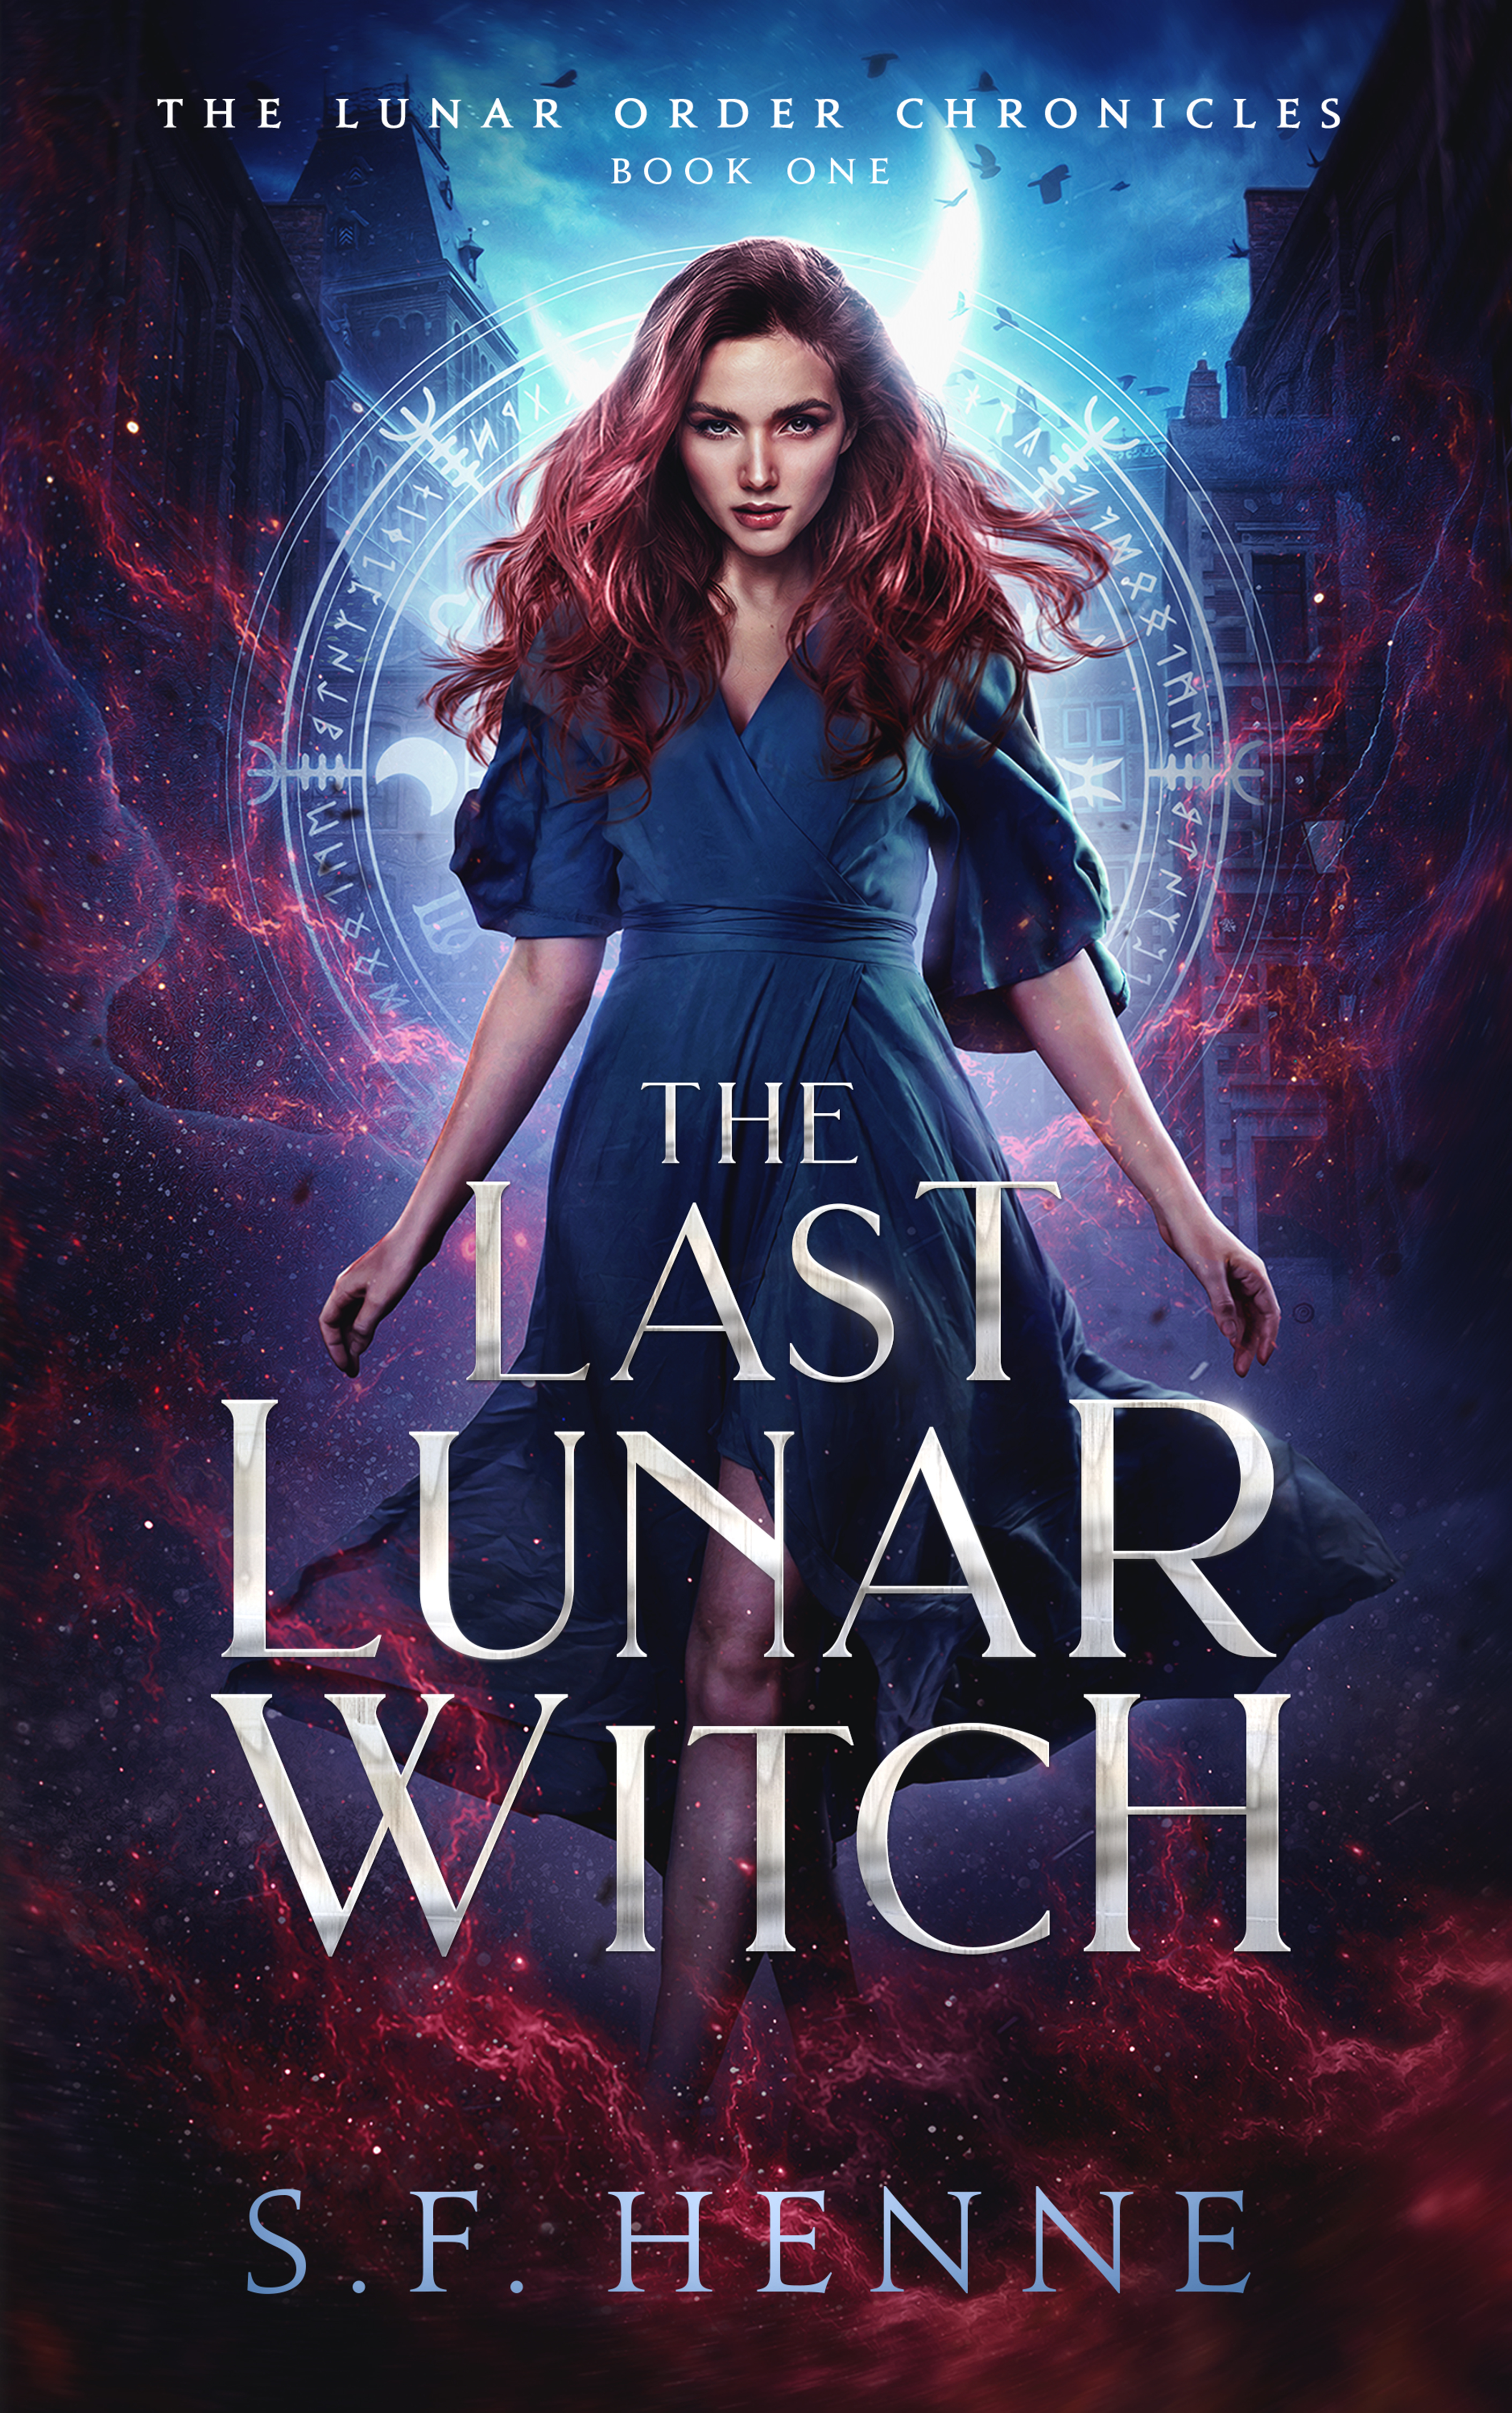 The Last Lunar Witch (The Lunar Order Chronicles Book 1)